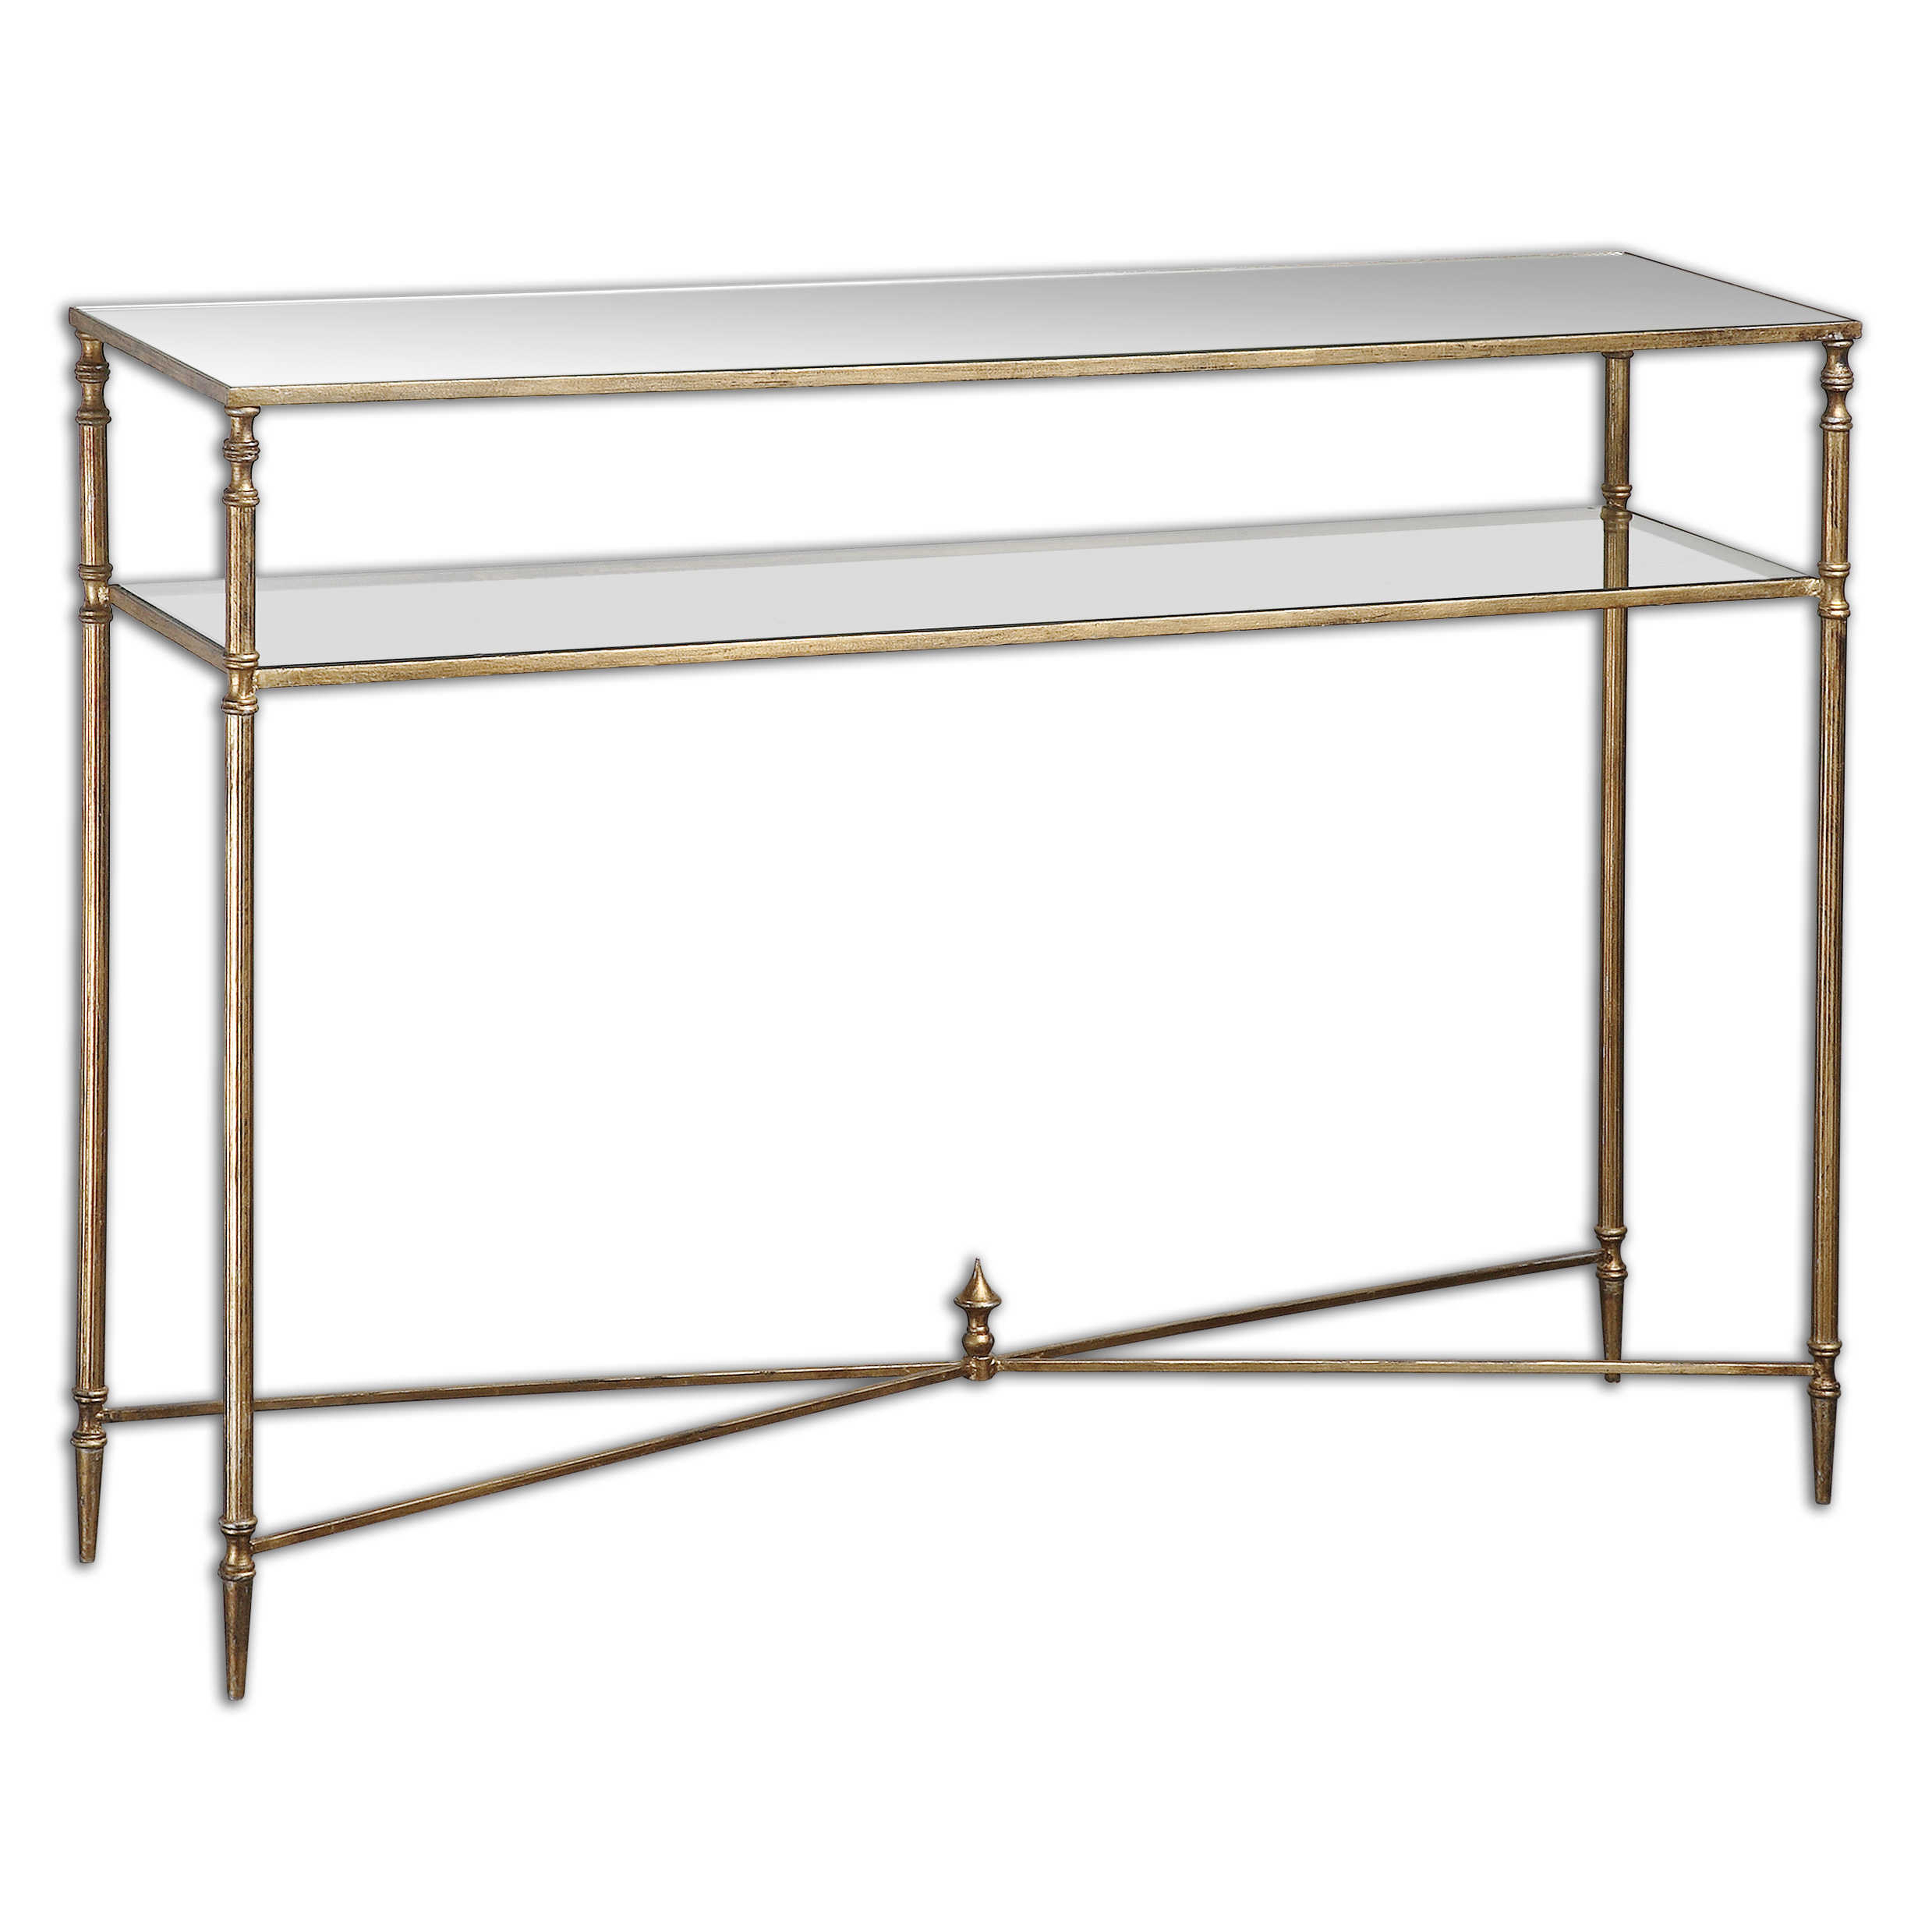 Henzler Console Table - Hudsonhill Foundry